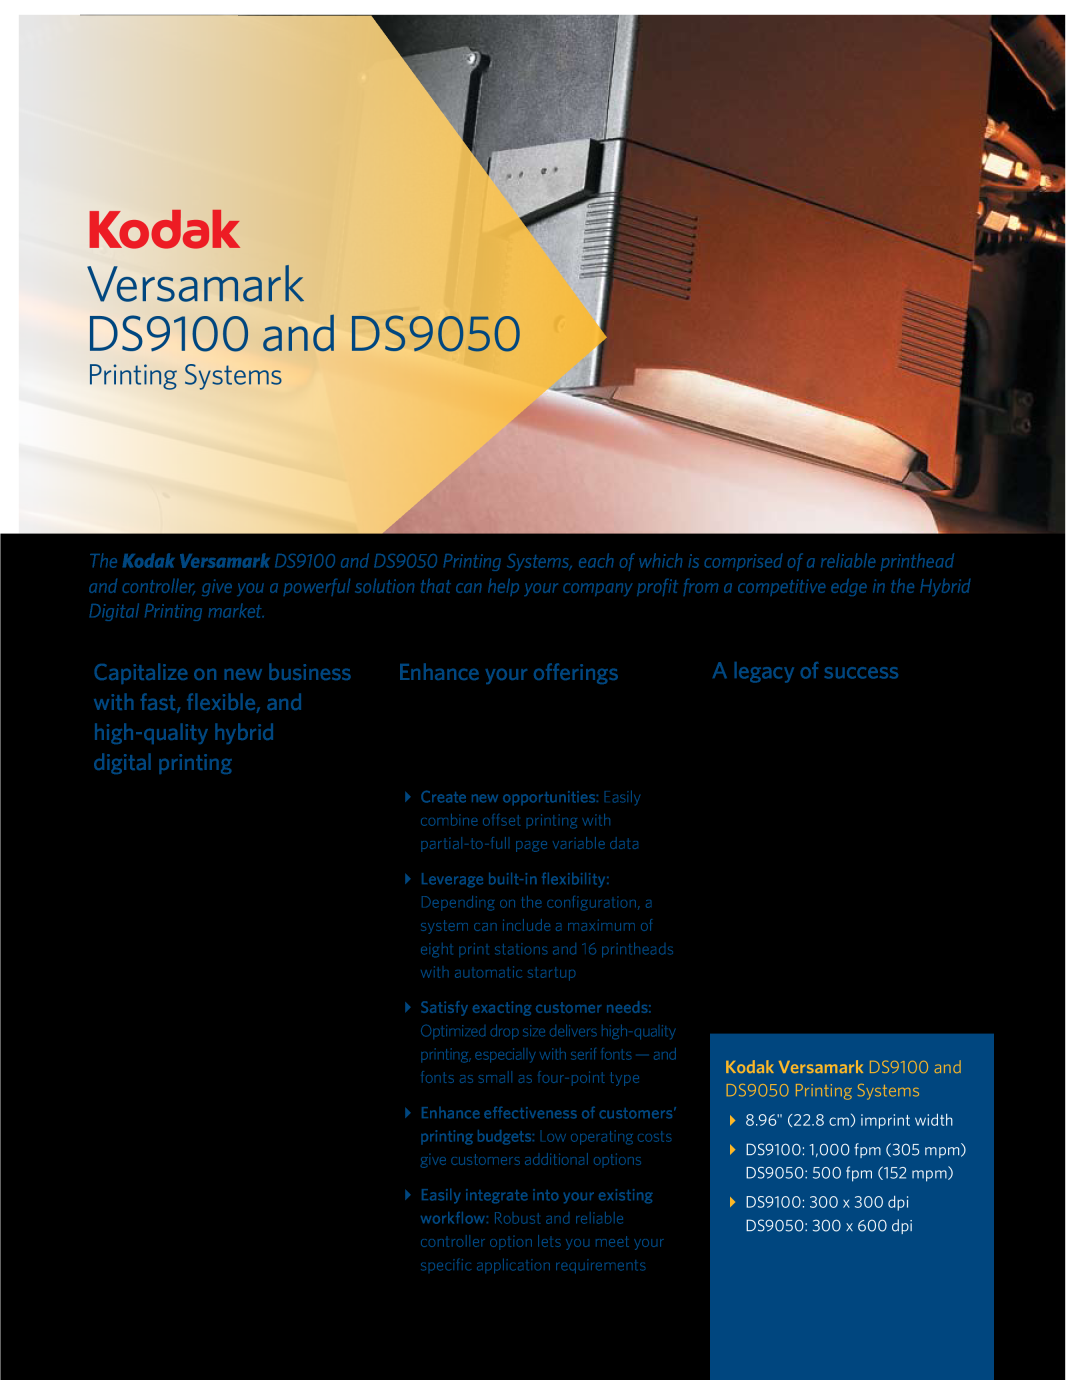 Kodak manual Versamark DS9100 and DS9050, Printing Systems, Enhance your offerings, A legacy of success 